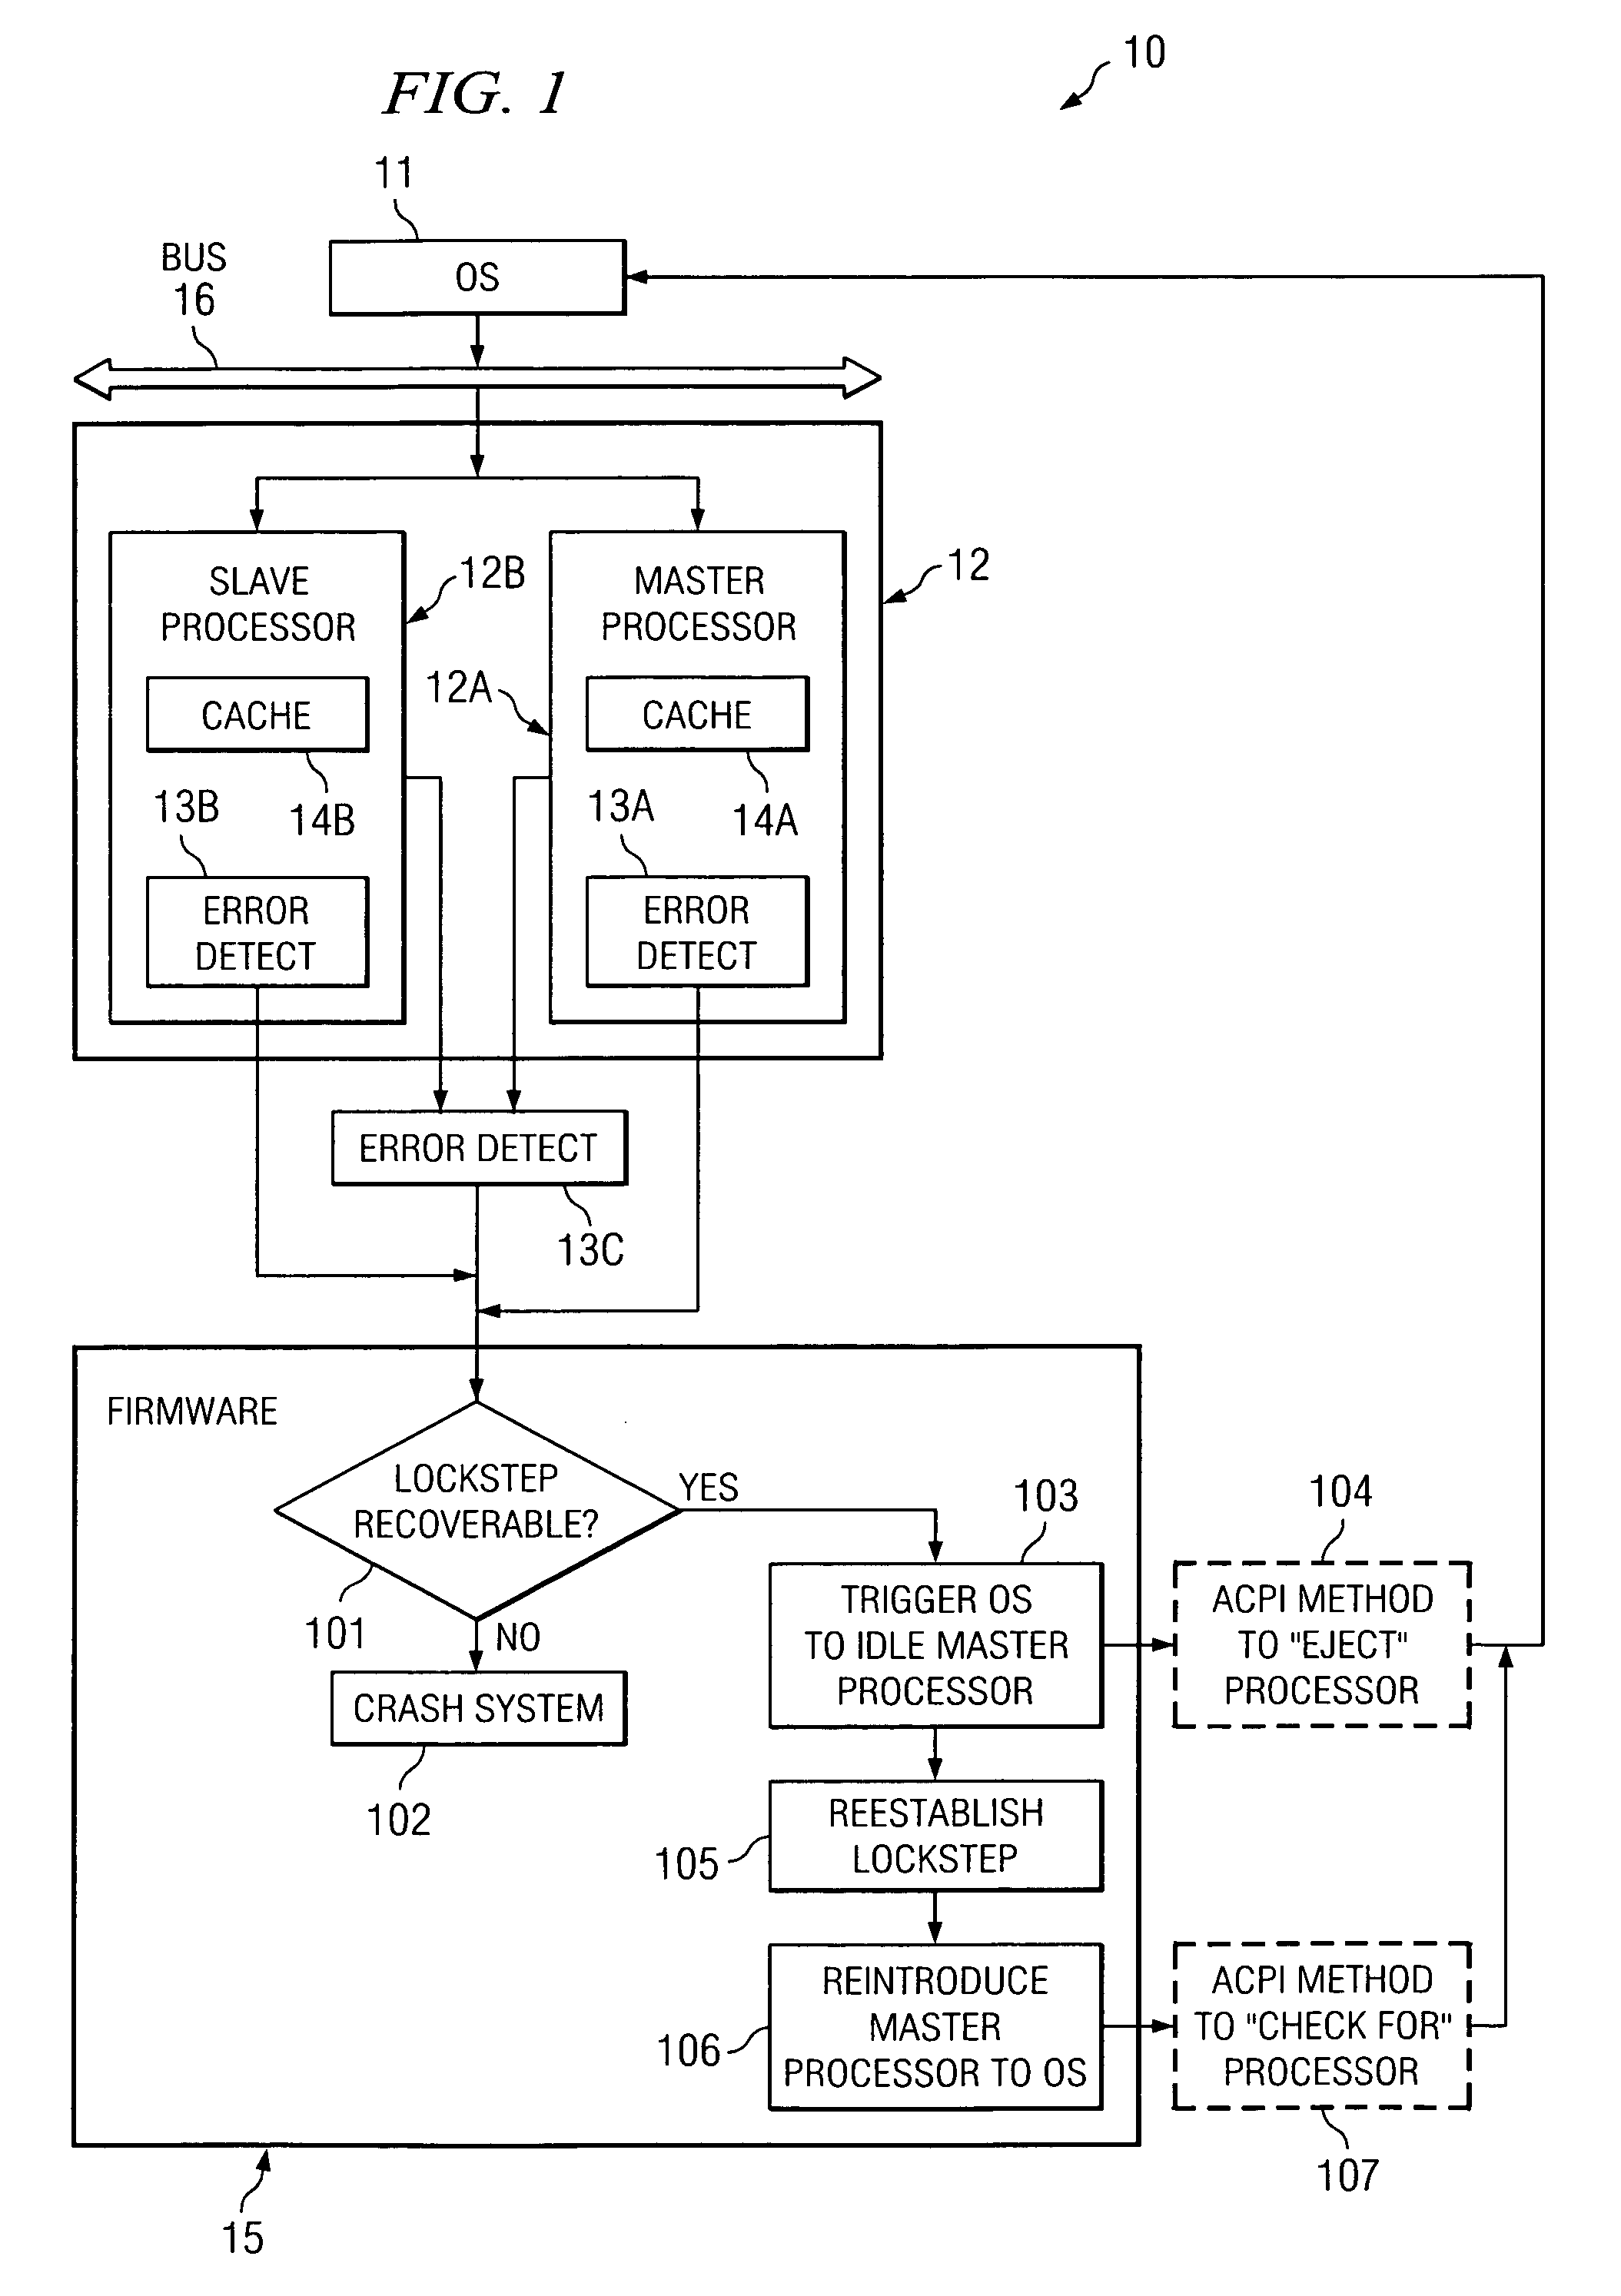 System and method for providing firmware recoverable lockstep protection